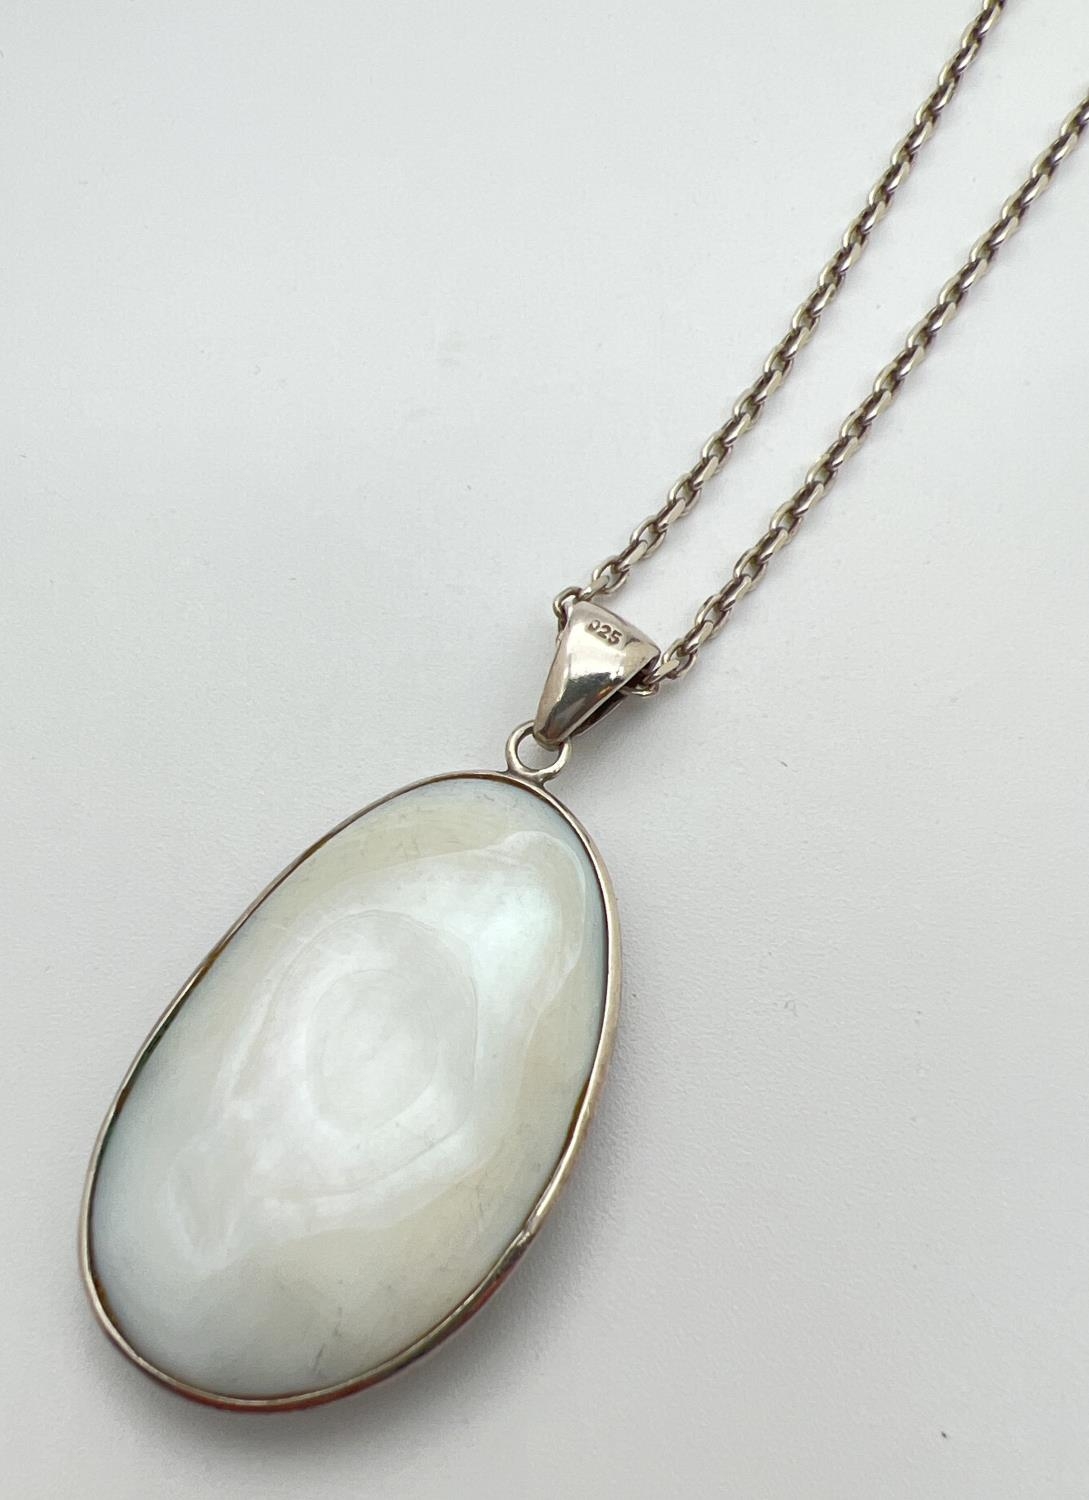 An oval shaped Abalone shell pendant set in silver, on a 20" belcher chain with spring ring clasp. - Image 3 of 3